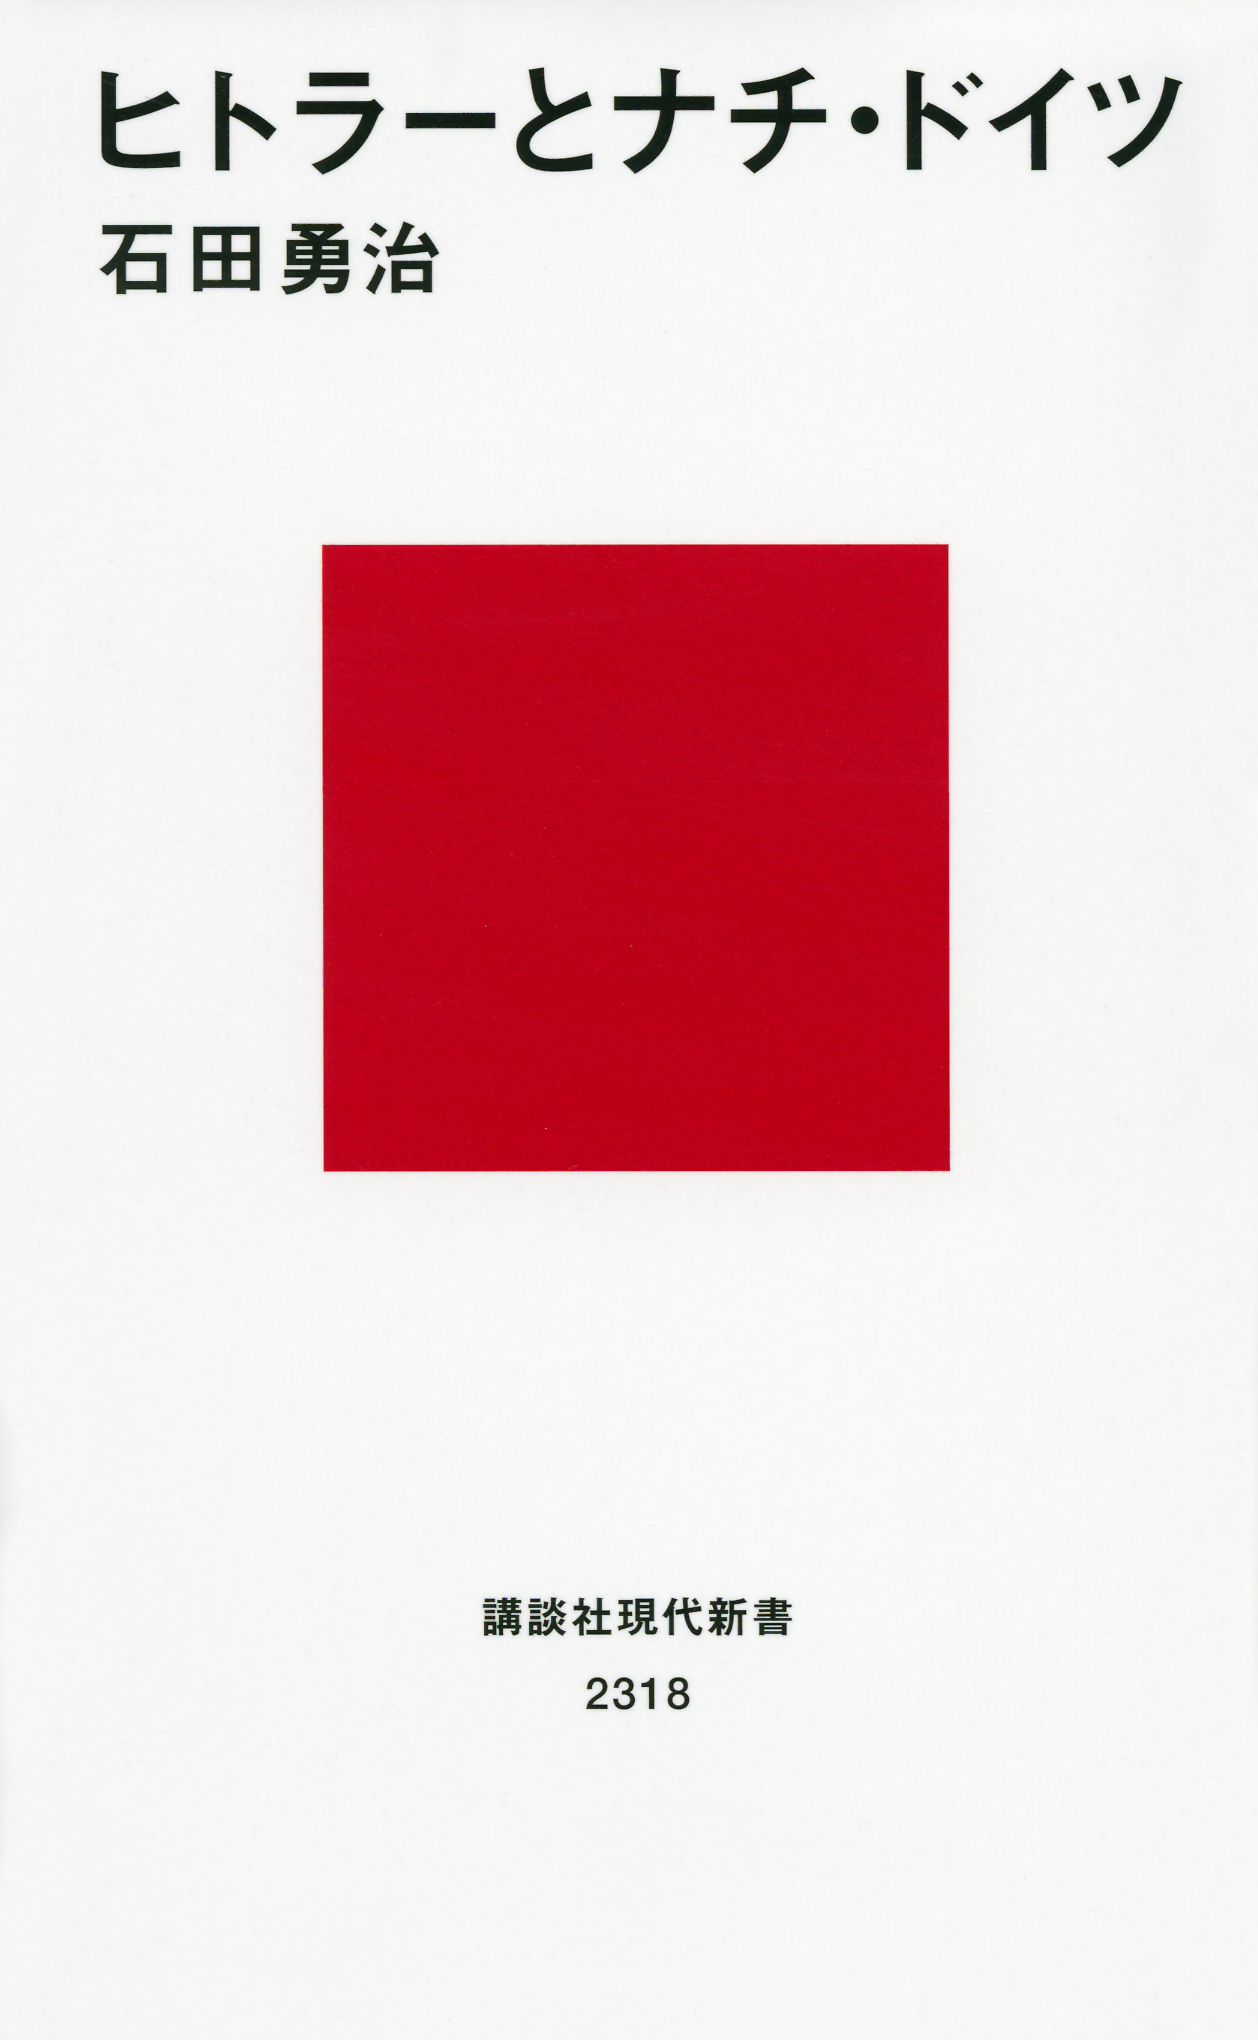 A simple red square on white cover